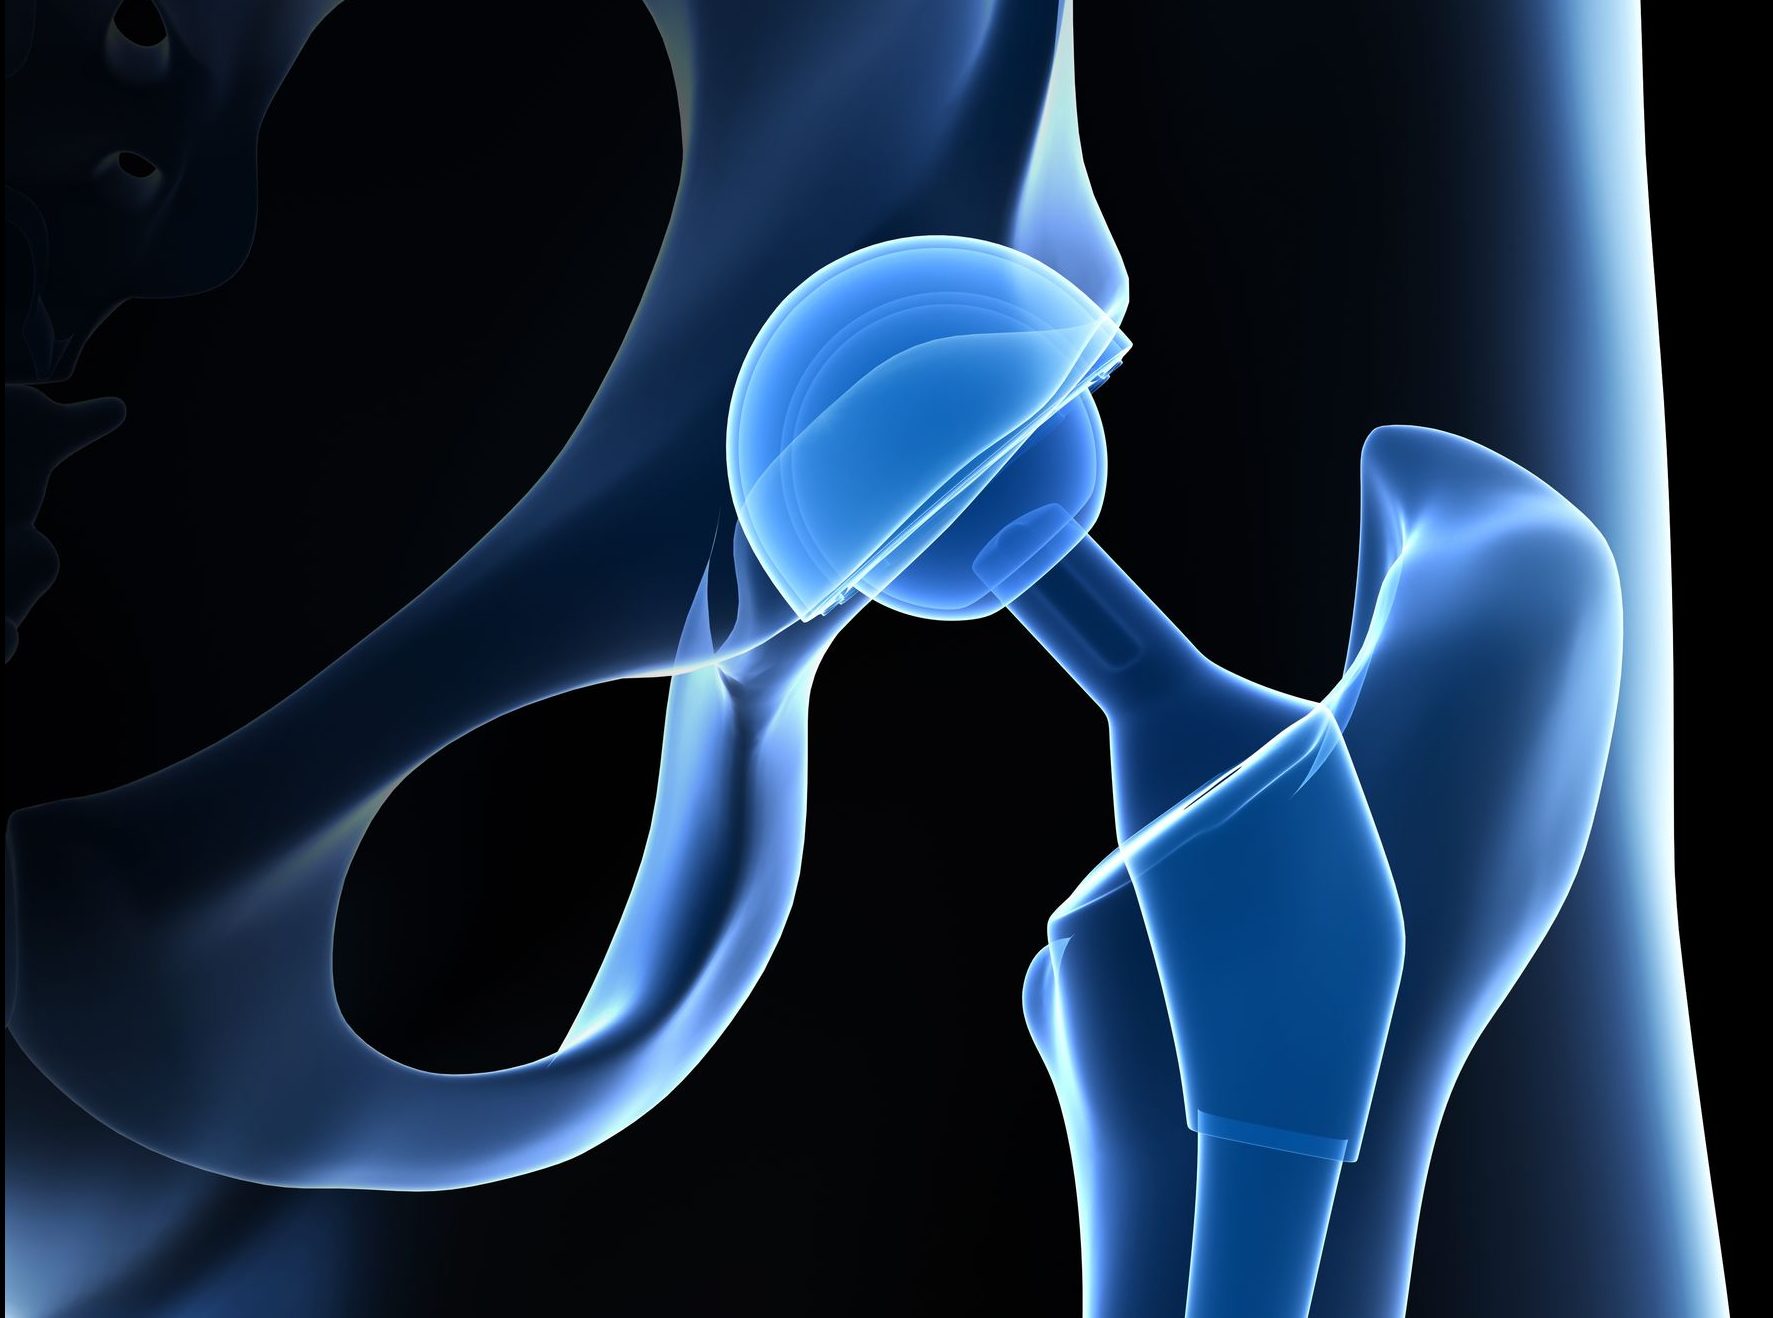 3D rendered illustration of a hip replacement